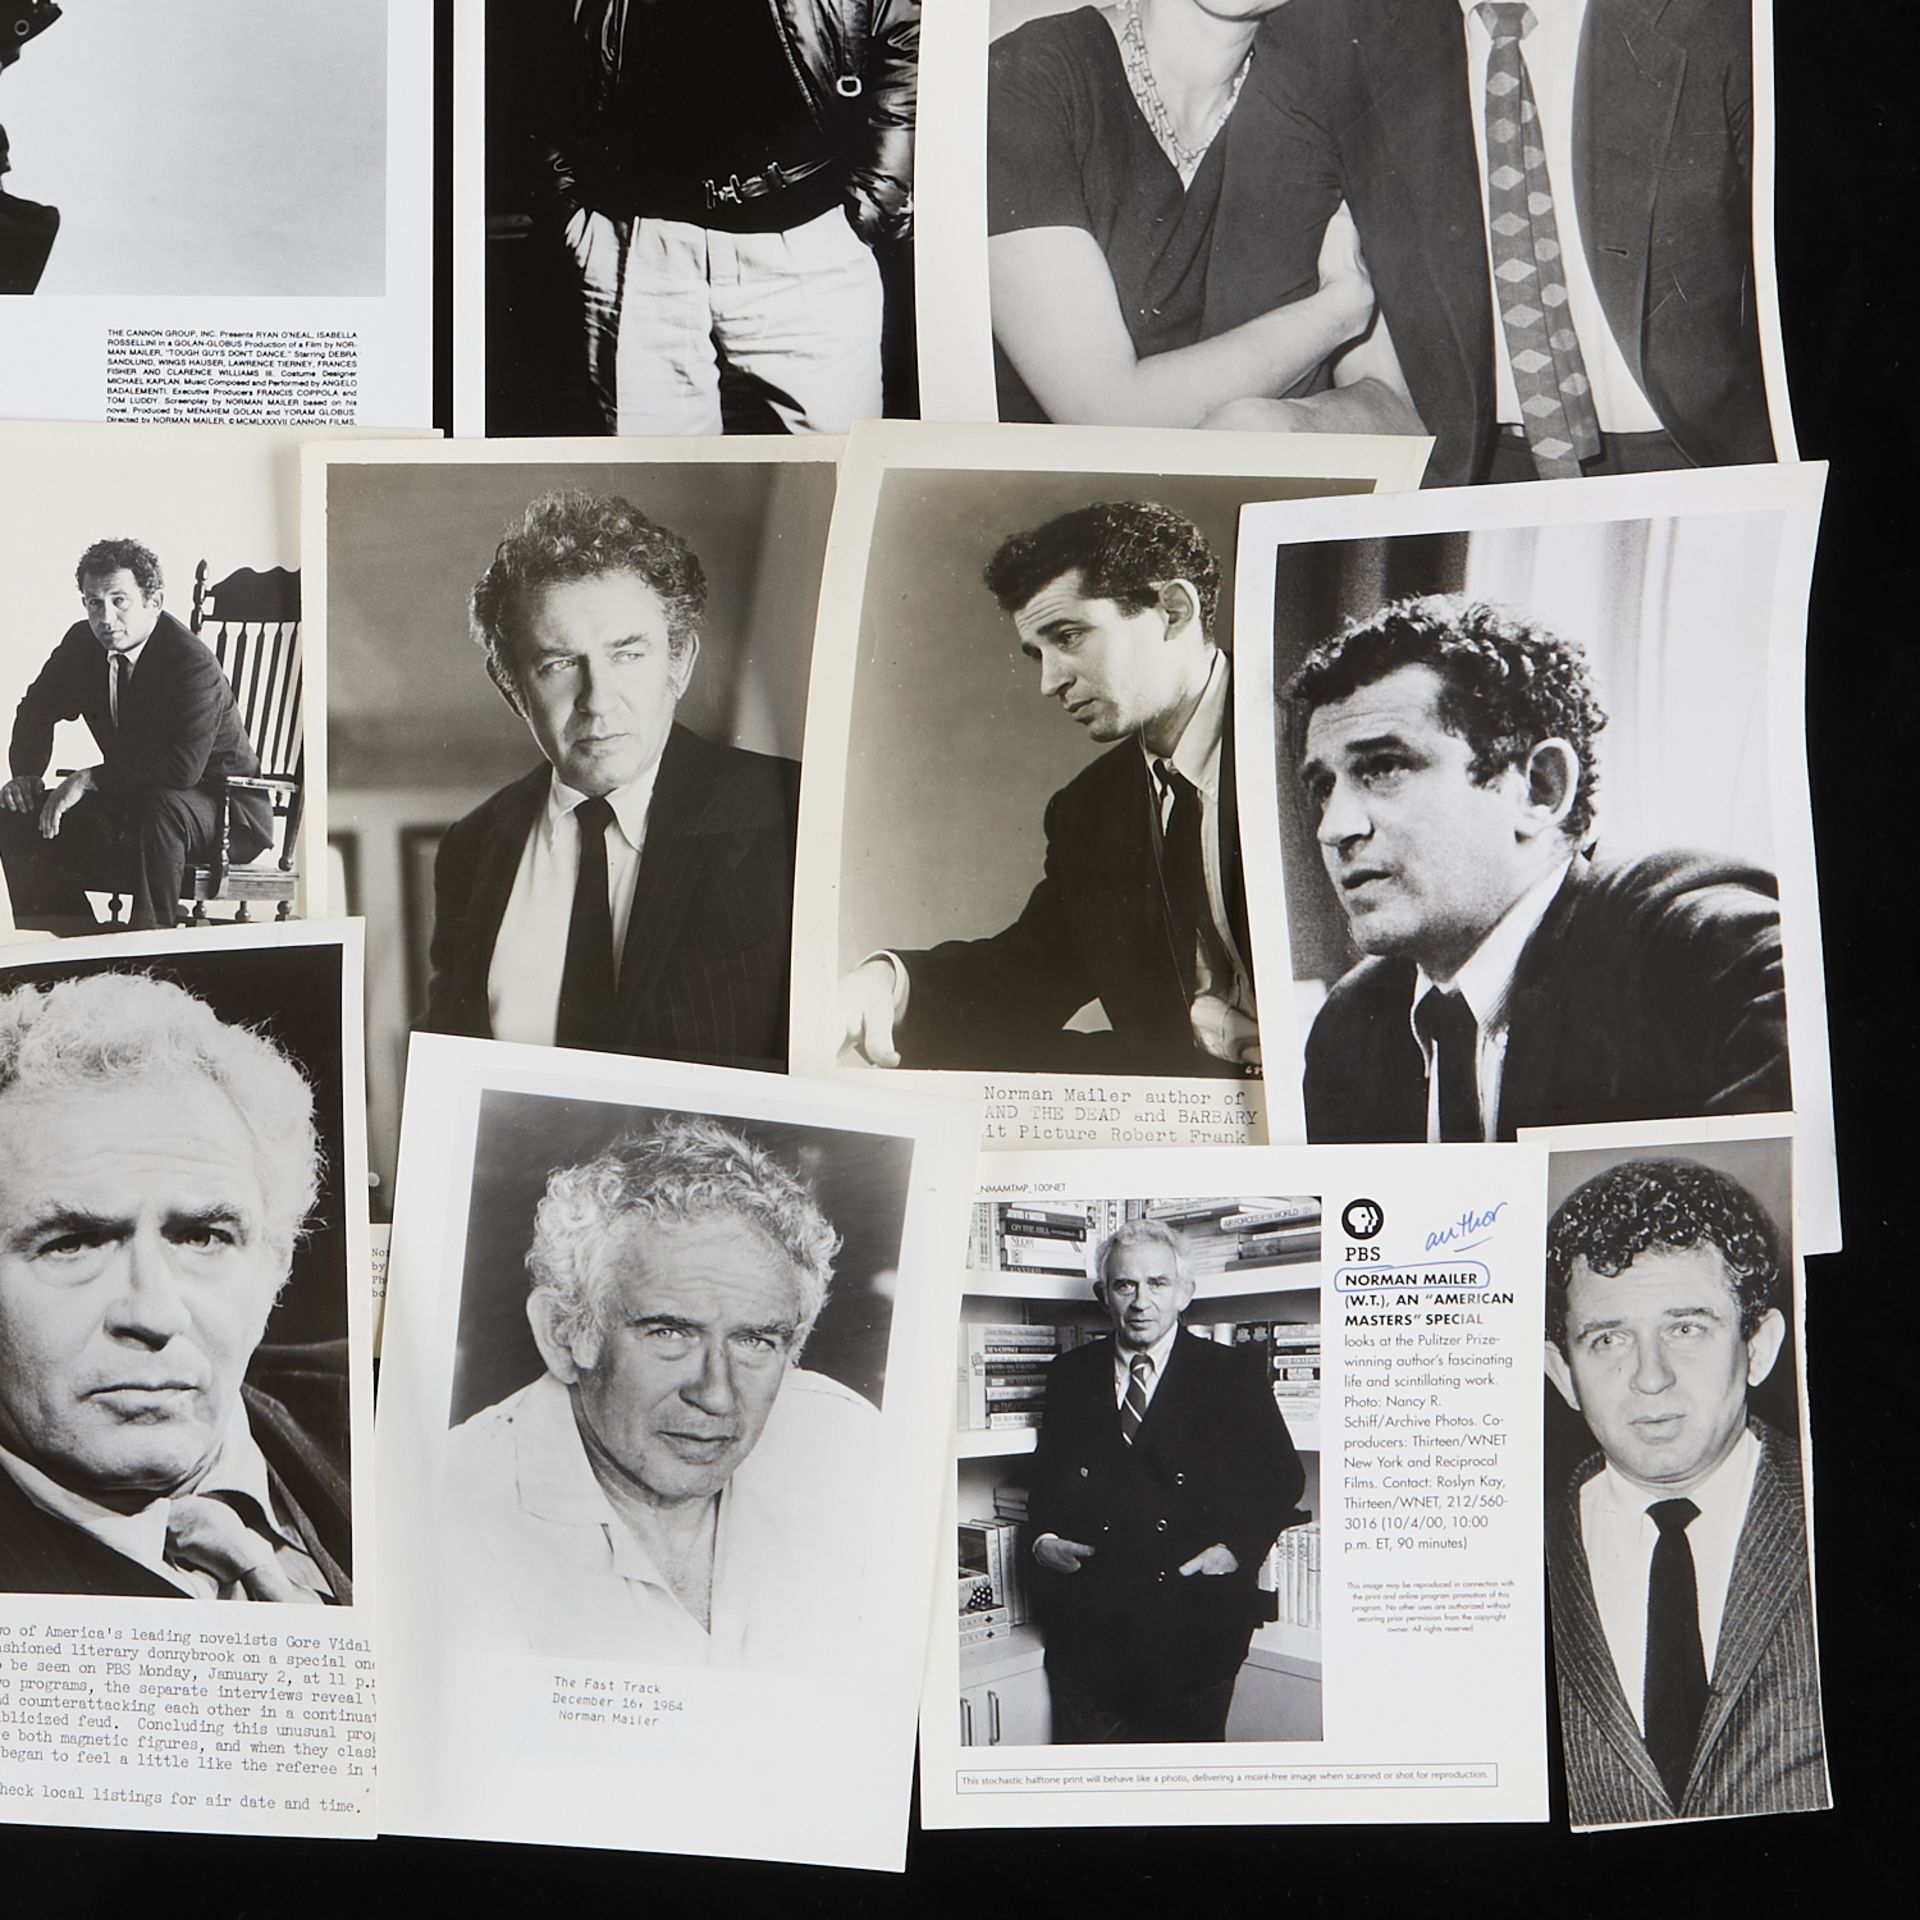 24 Norman Mailer Photos from Star Tribune Archives - Image 3 of 10